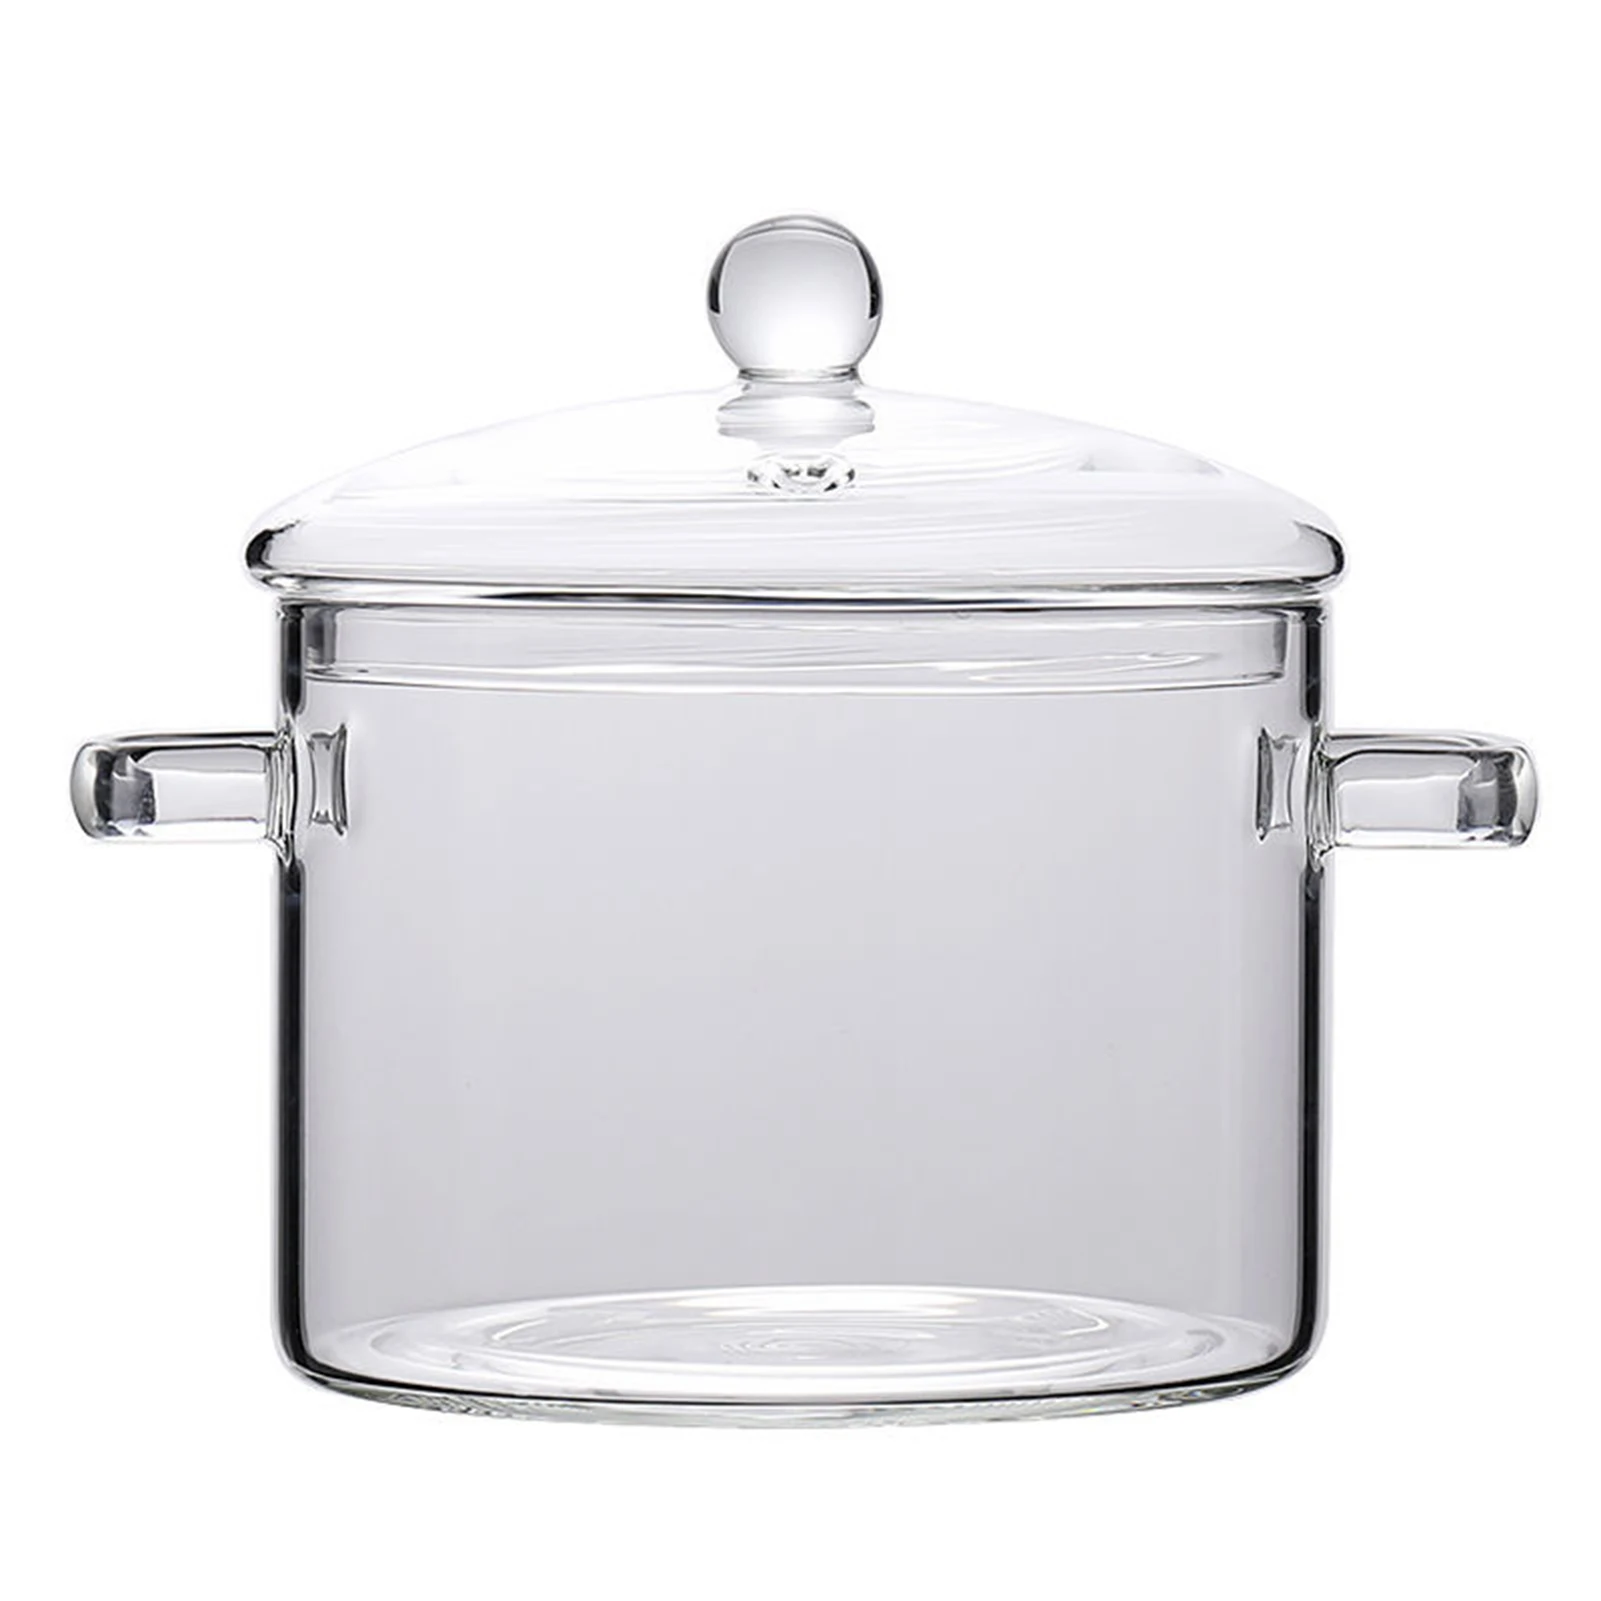 https://ae01.alicdn.com/kf/S5c499243b74841c0b096325087a187915/High-Borosilicate-Glass-Simmer-Pot-Thicker-and-Heavier-Upgraded-Glass-Pot-for-Use-on-Open-Flames.jpg